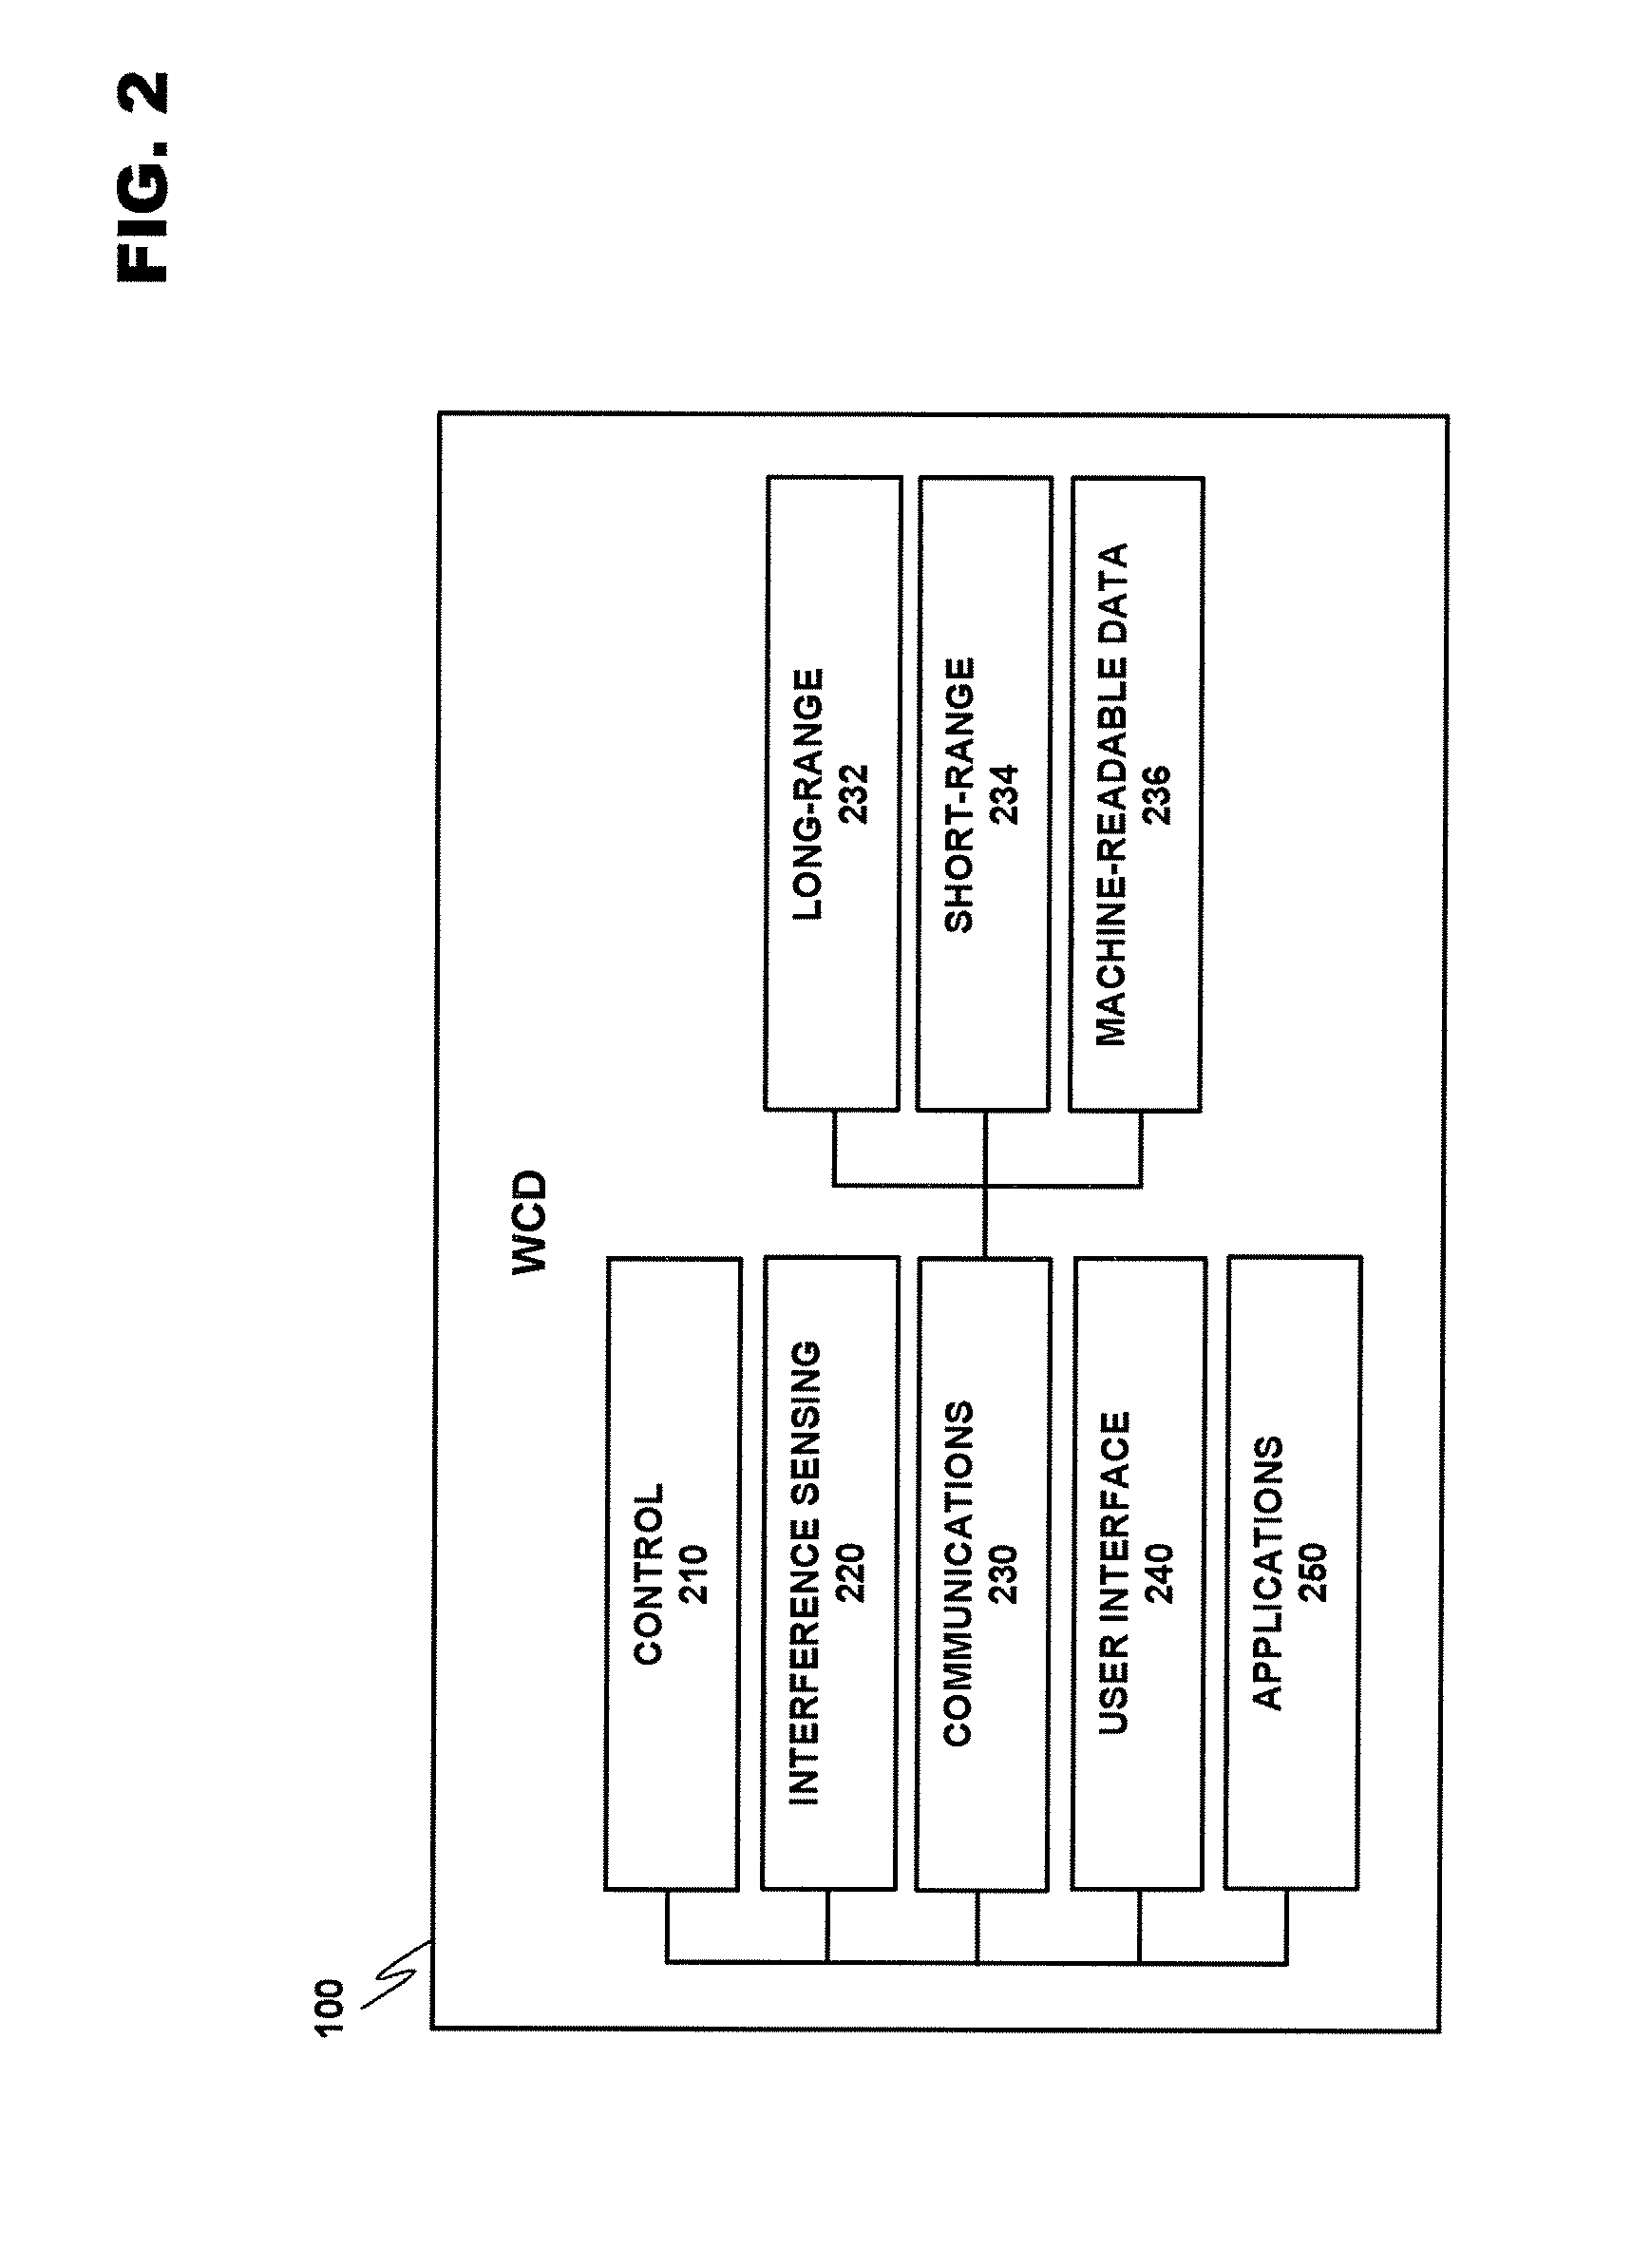 Managing low-power wireless mediums in multiradio devices